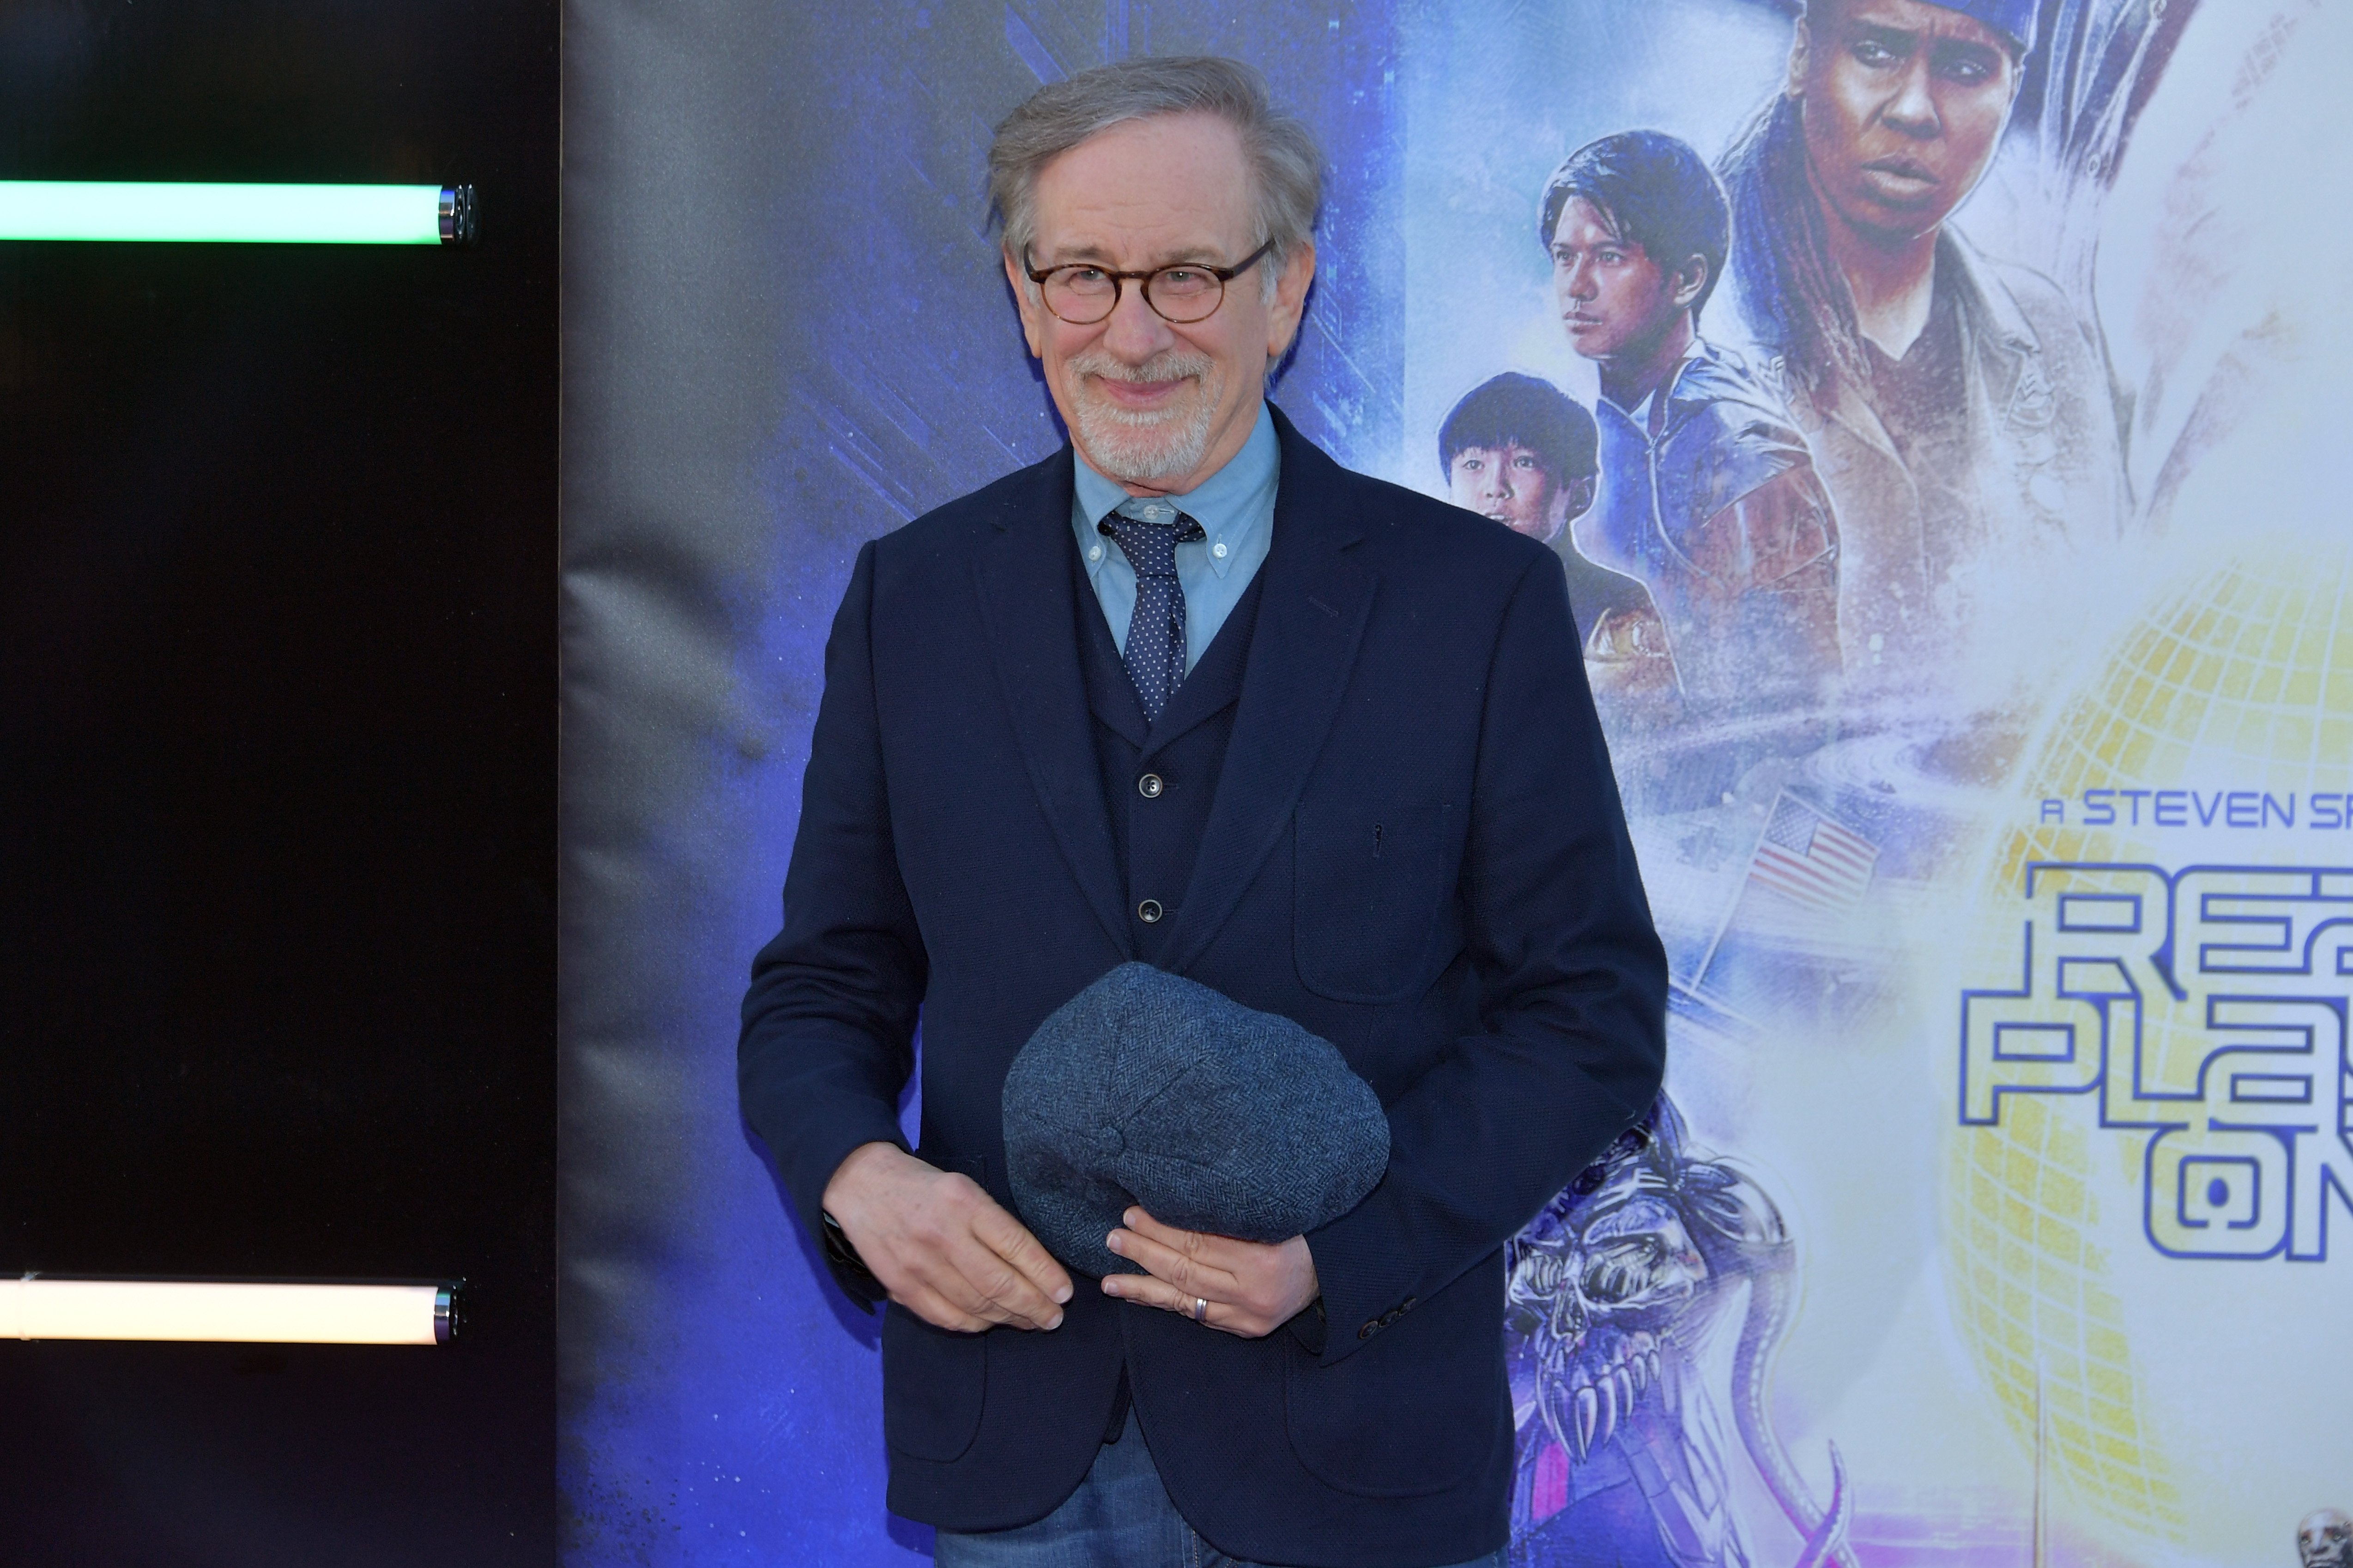  Steven Spielberg attends the Premiere of Warner Bros. Pictures' "Ready Player One" at Dolby Theatre on March 26, 2018 | Photo: GettyImages